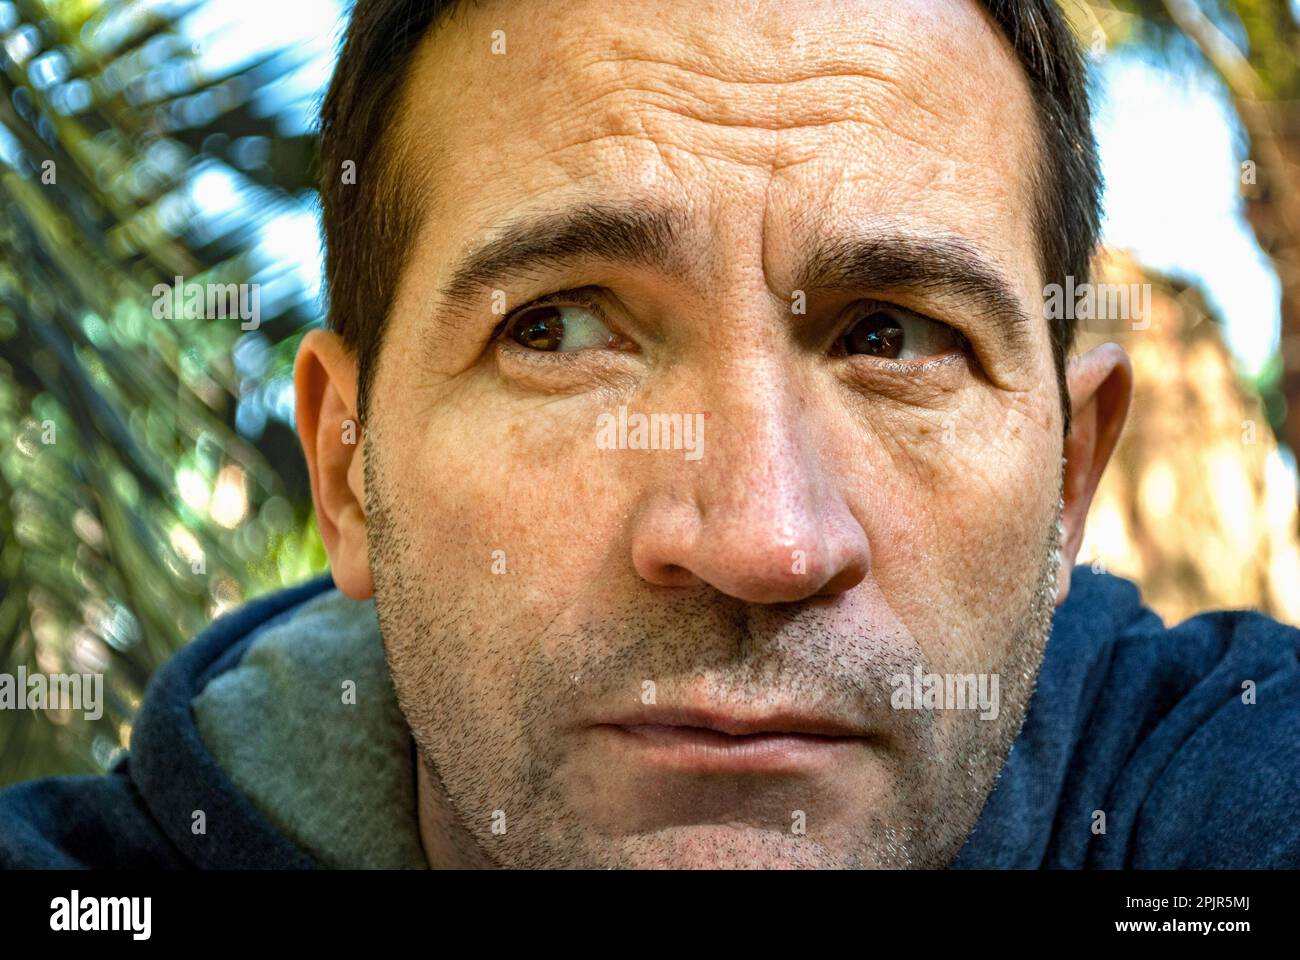 A man paying attention to a certain situation. Stock Photo